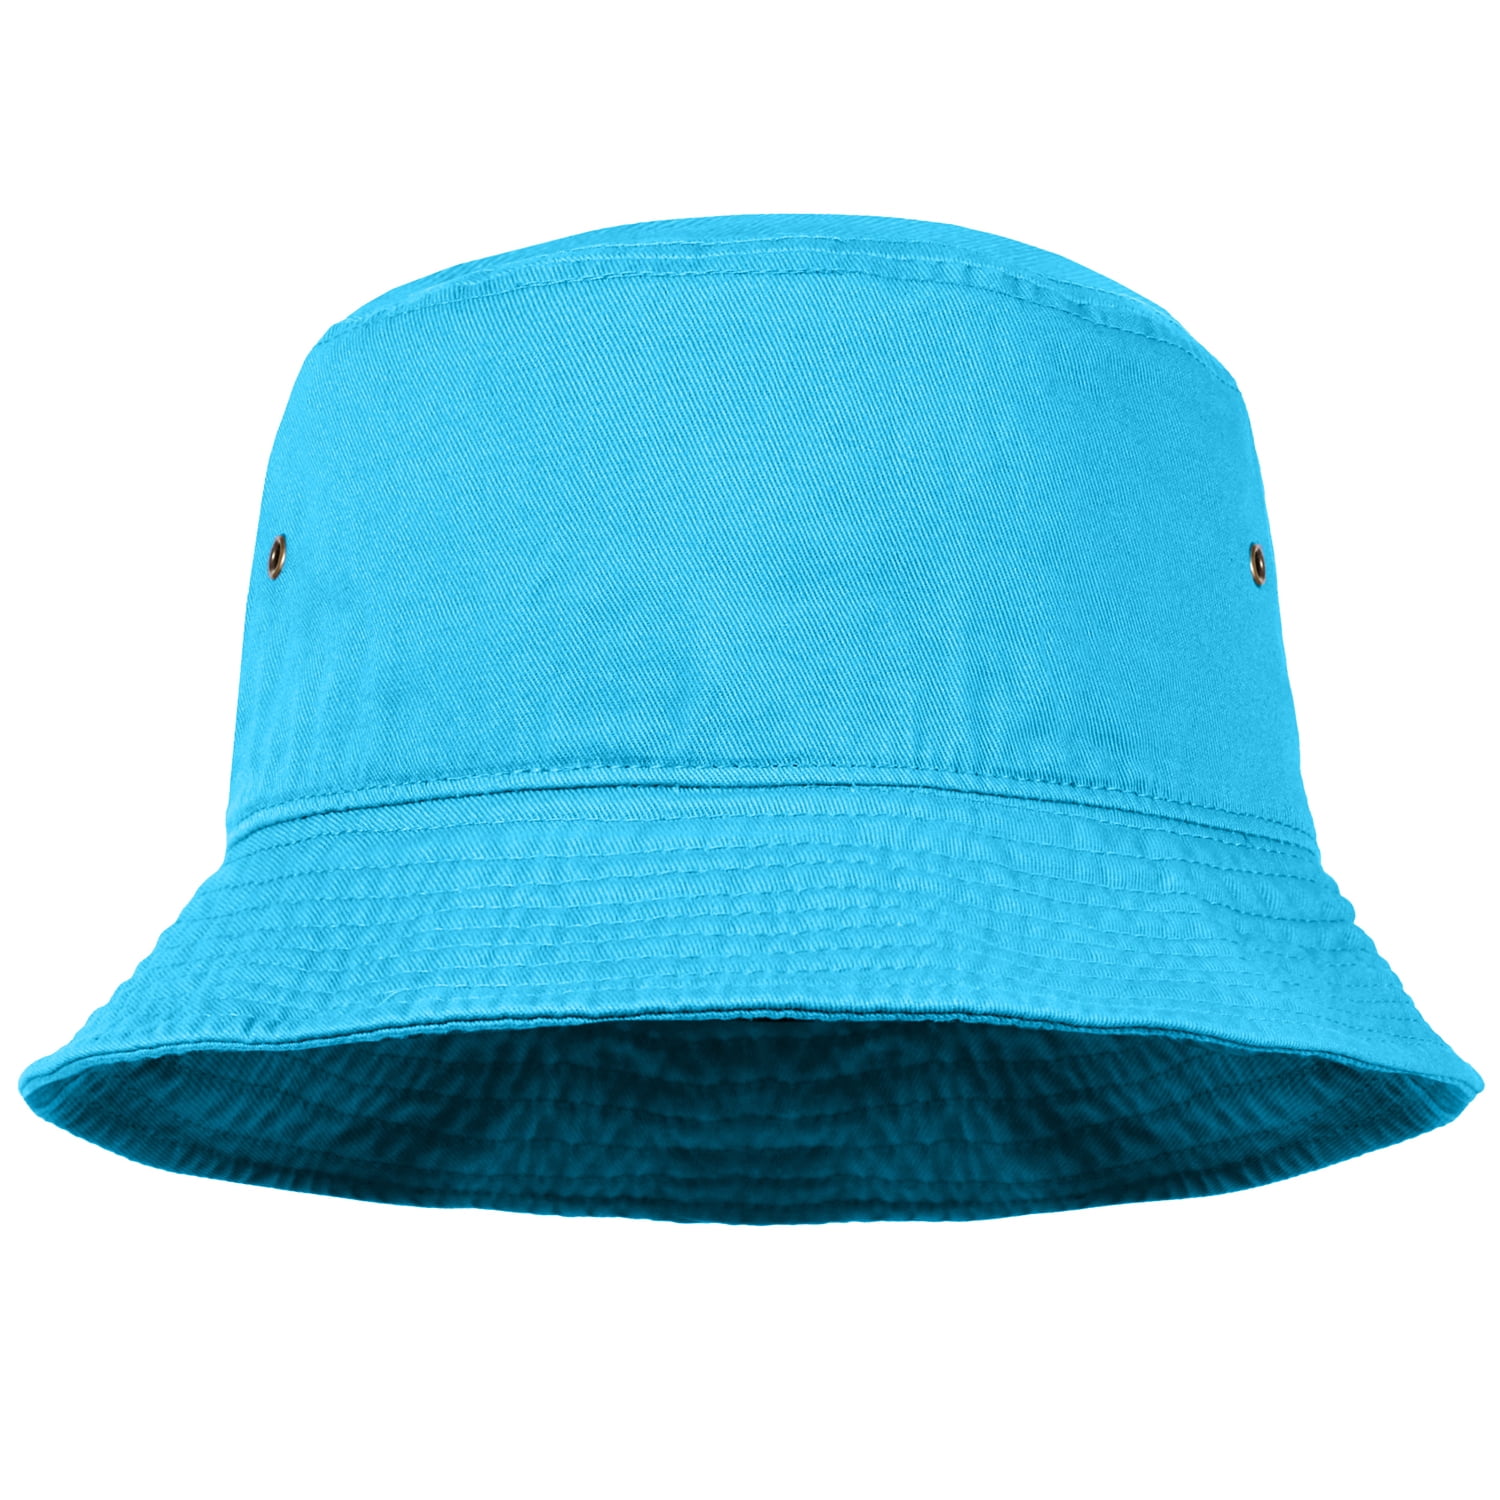 Bucket Hat for Men Women Unisex 100% Cotton Packable Foldable Summer Travel  Beach Outdoor Fishing Hat - LXL Turquoise